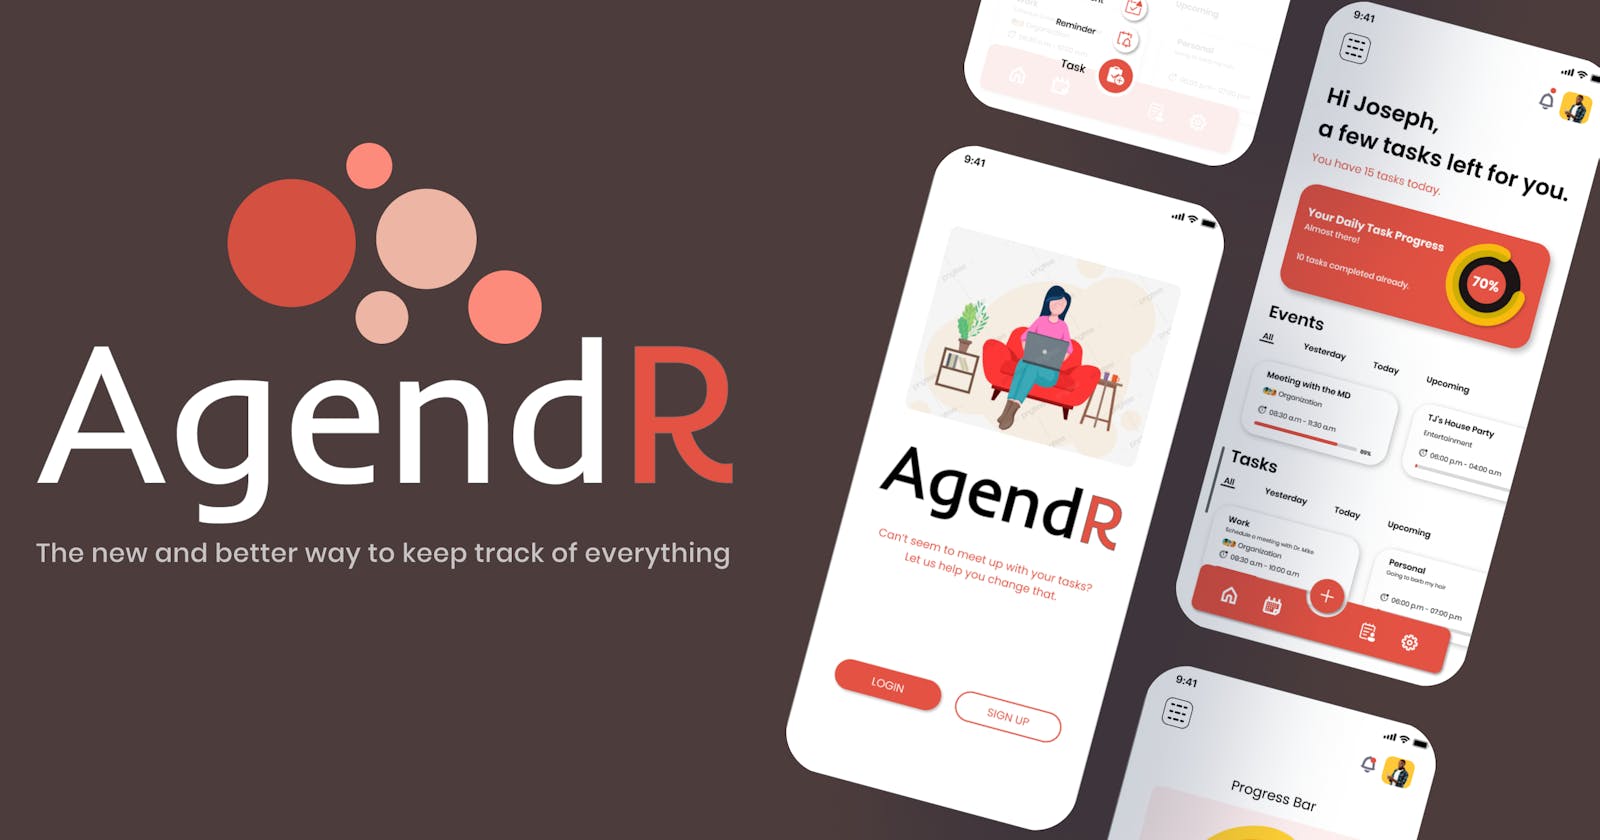 AgendR - More Than Just a User-Friendly To-Do List App